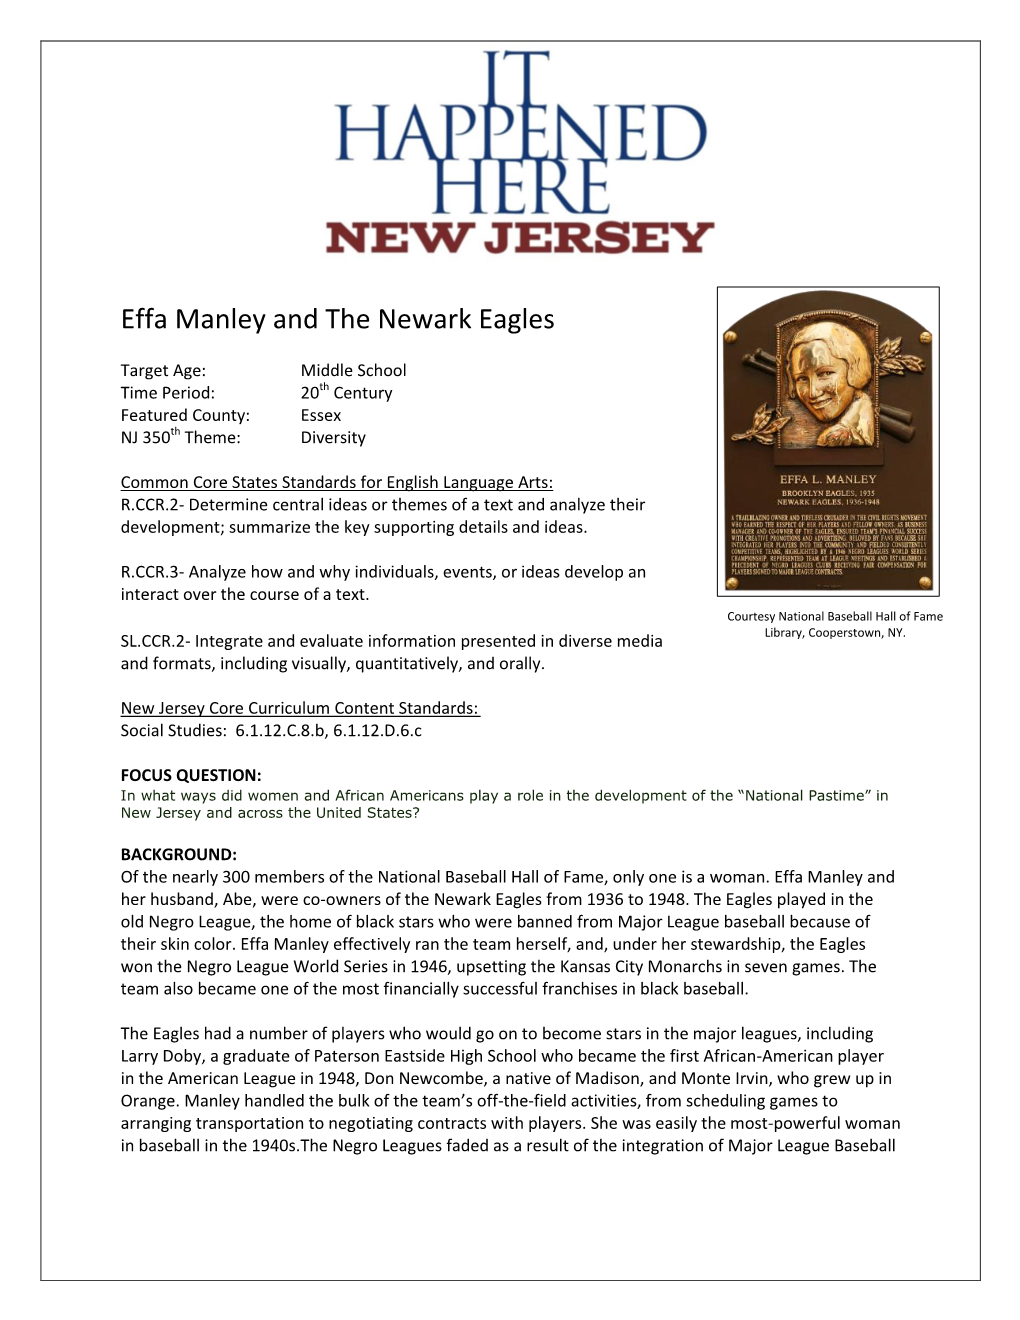 Effa Manley and the Newark Eagles